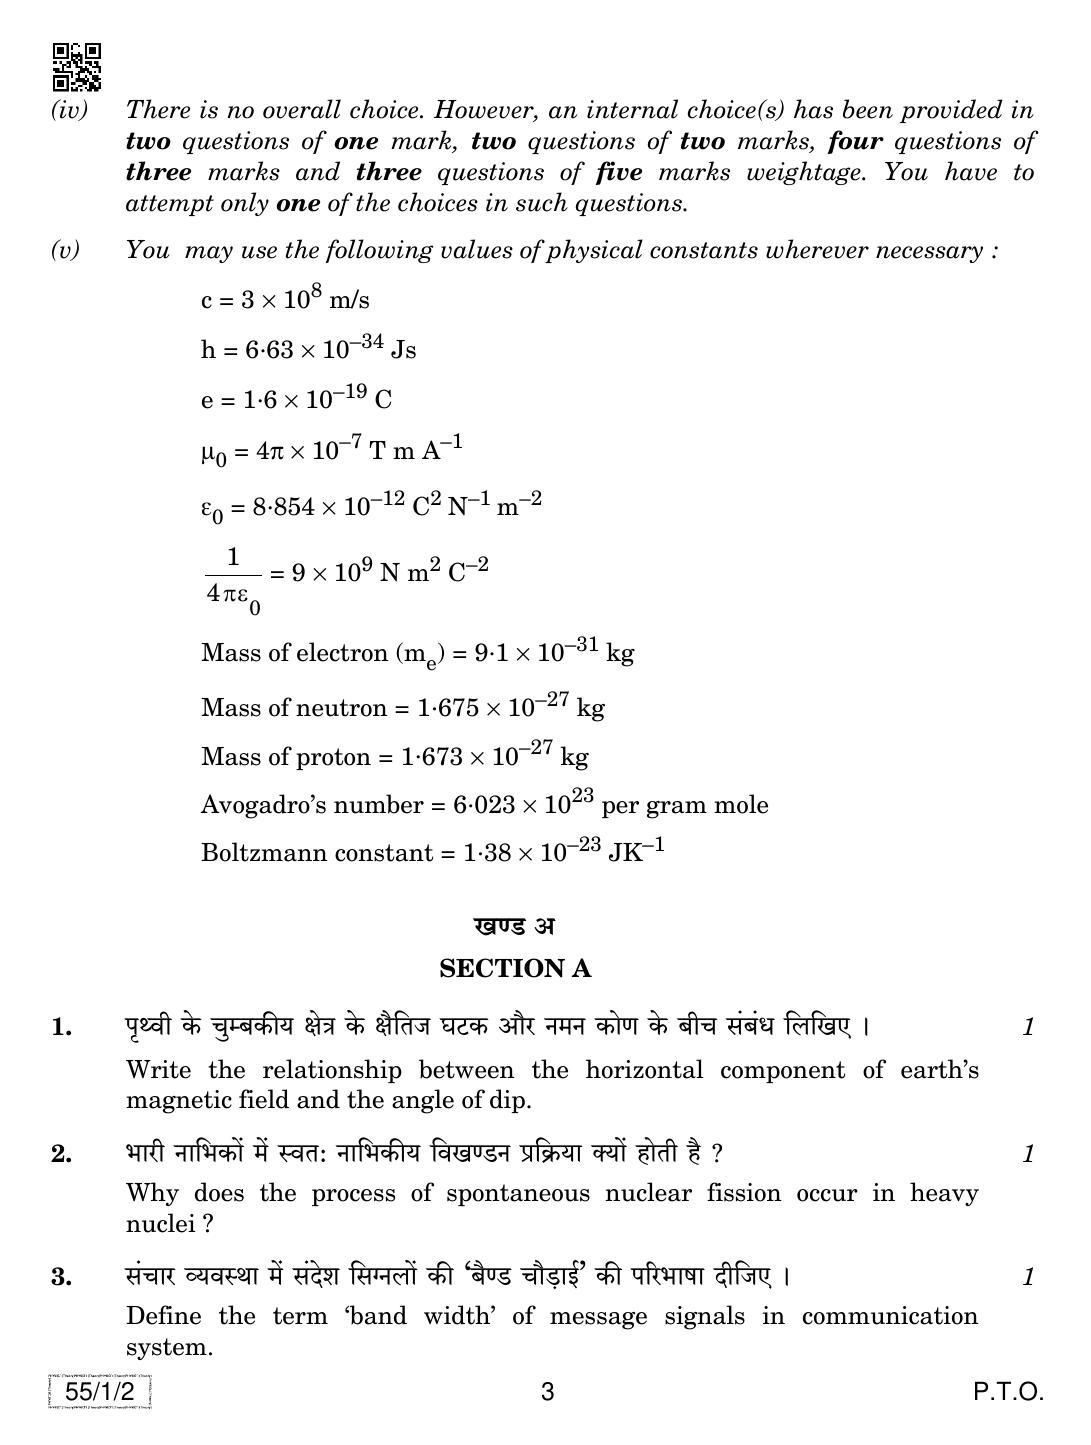 CBSE Class 12 55-1-2 PHYSICS 2019 Compartment Question Paper - Page 3